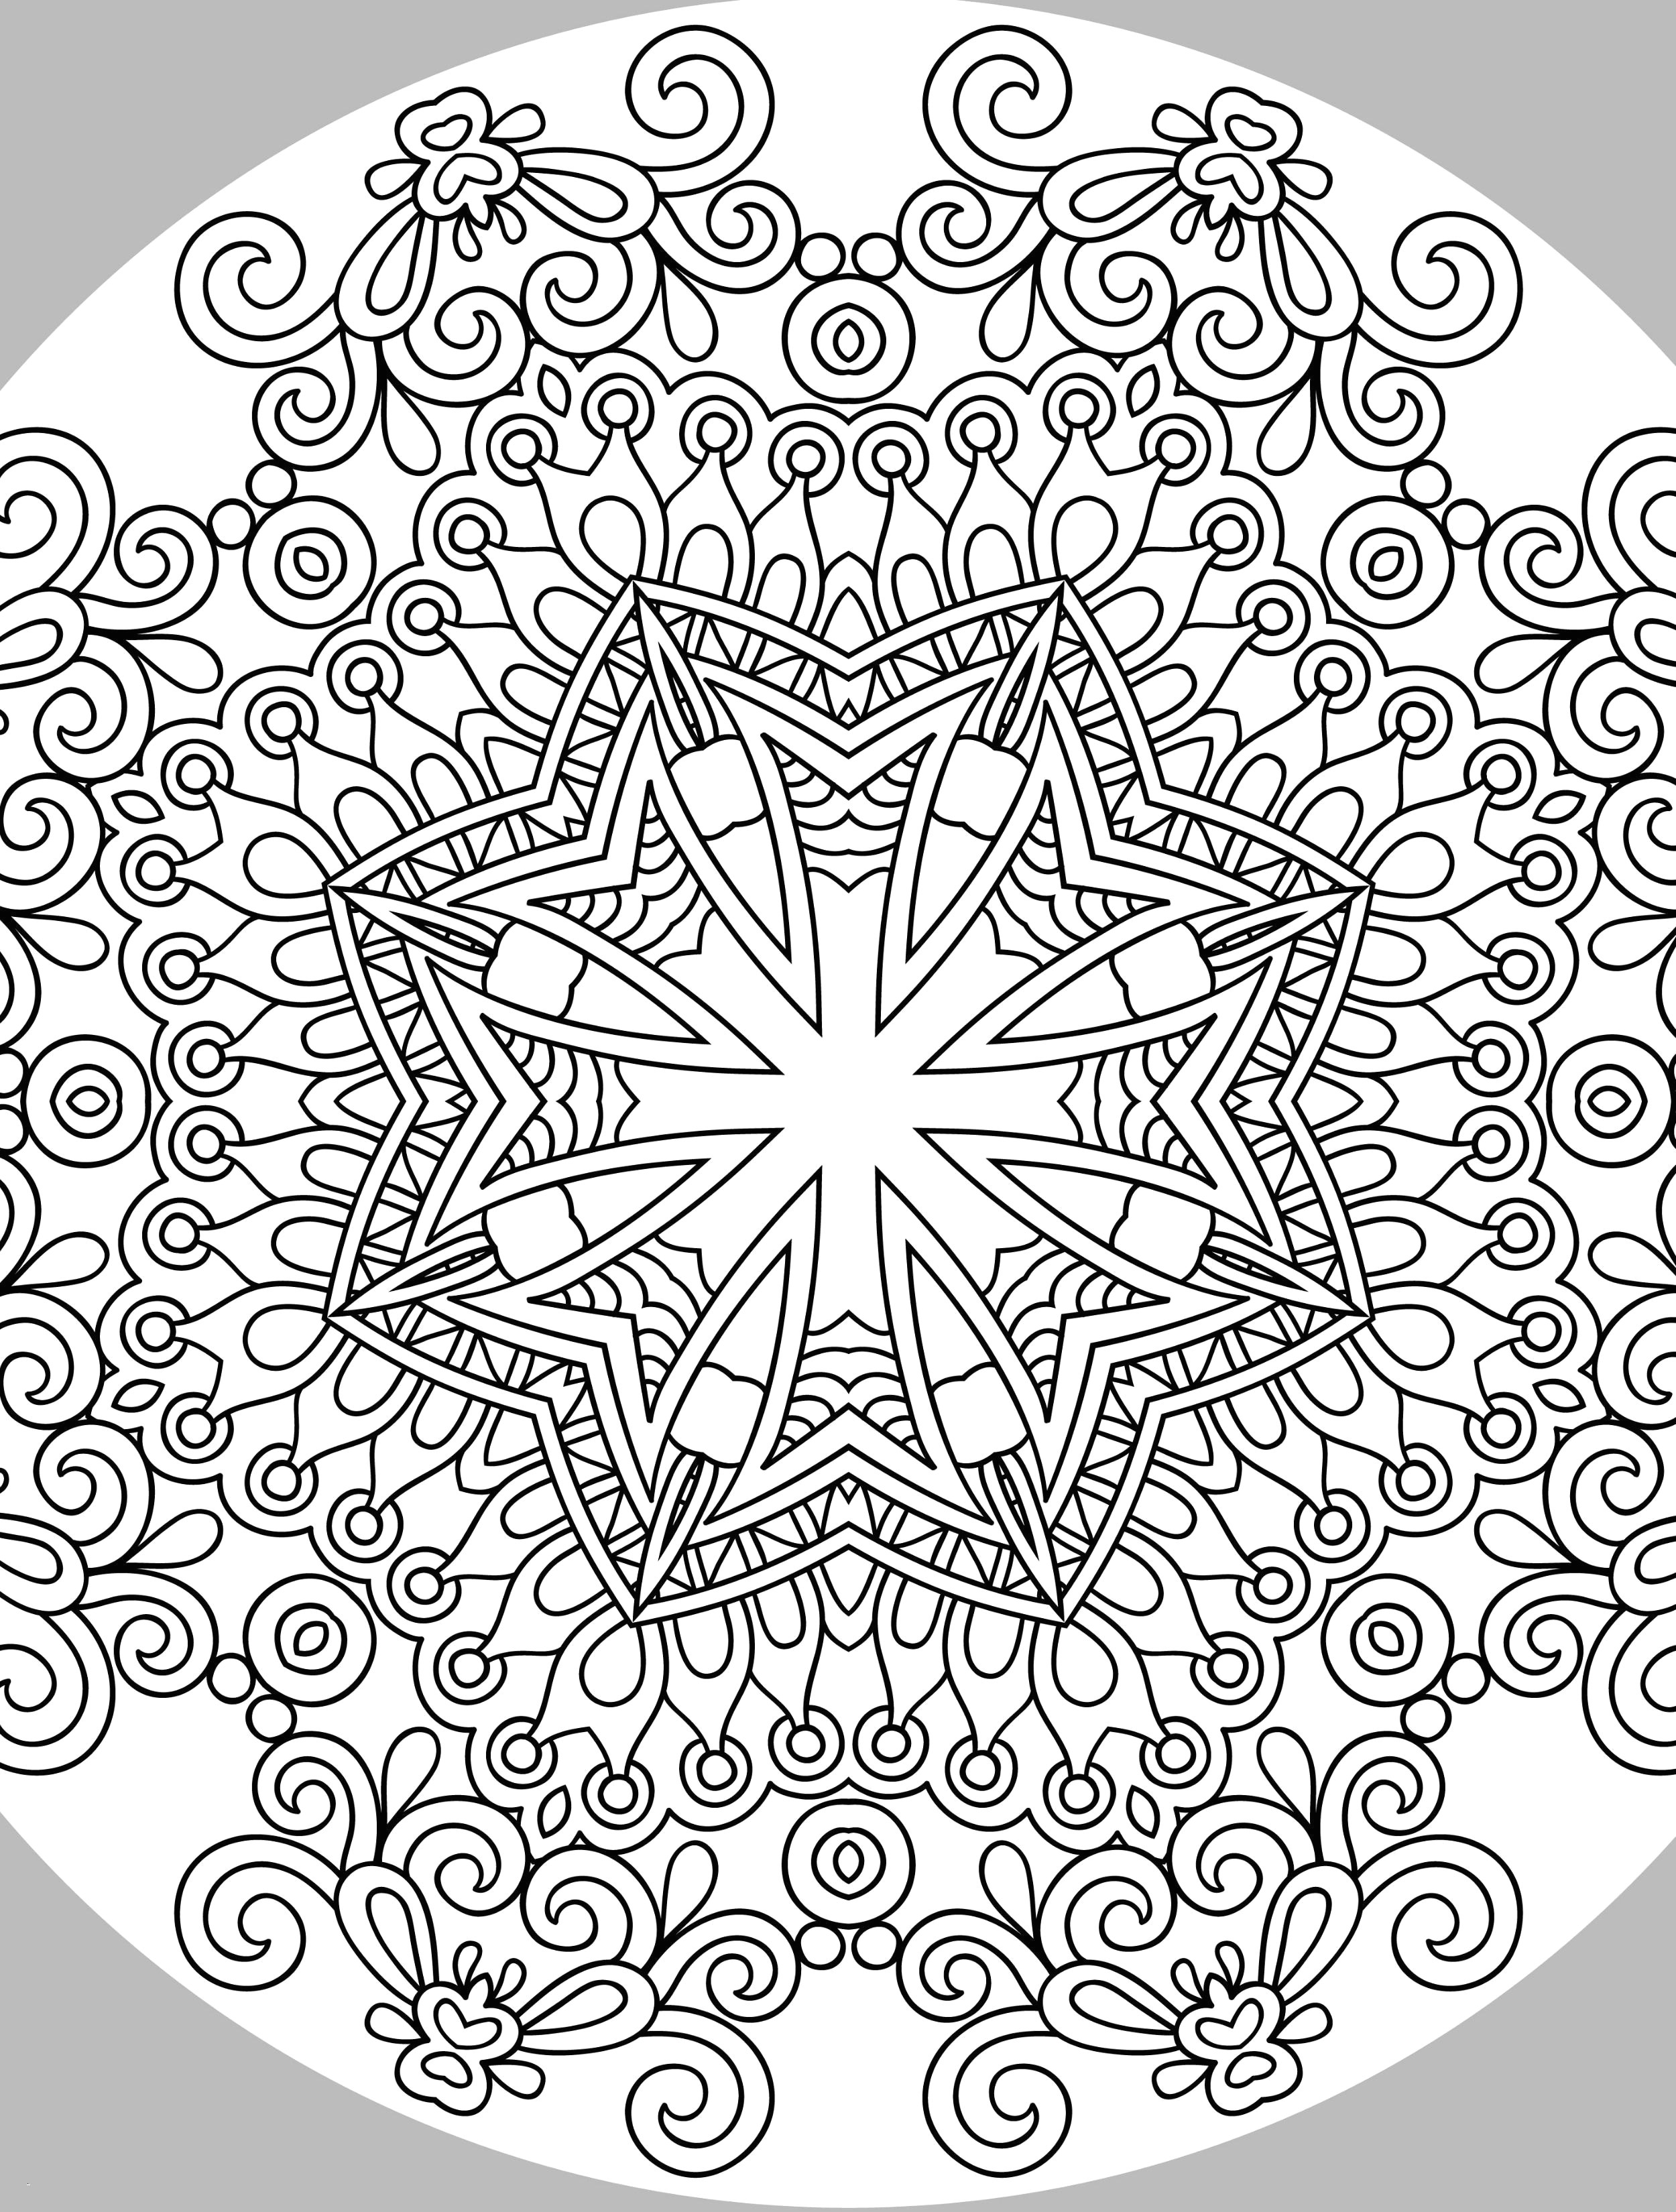 easy flower mandala coloring pages fresh printable mandala coloring pages awesome superhero symbols coloring